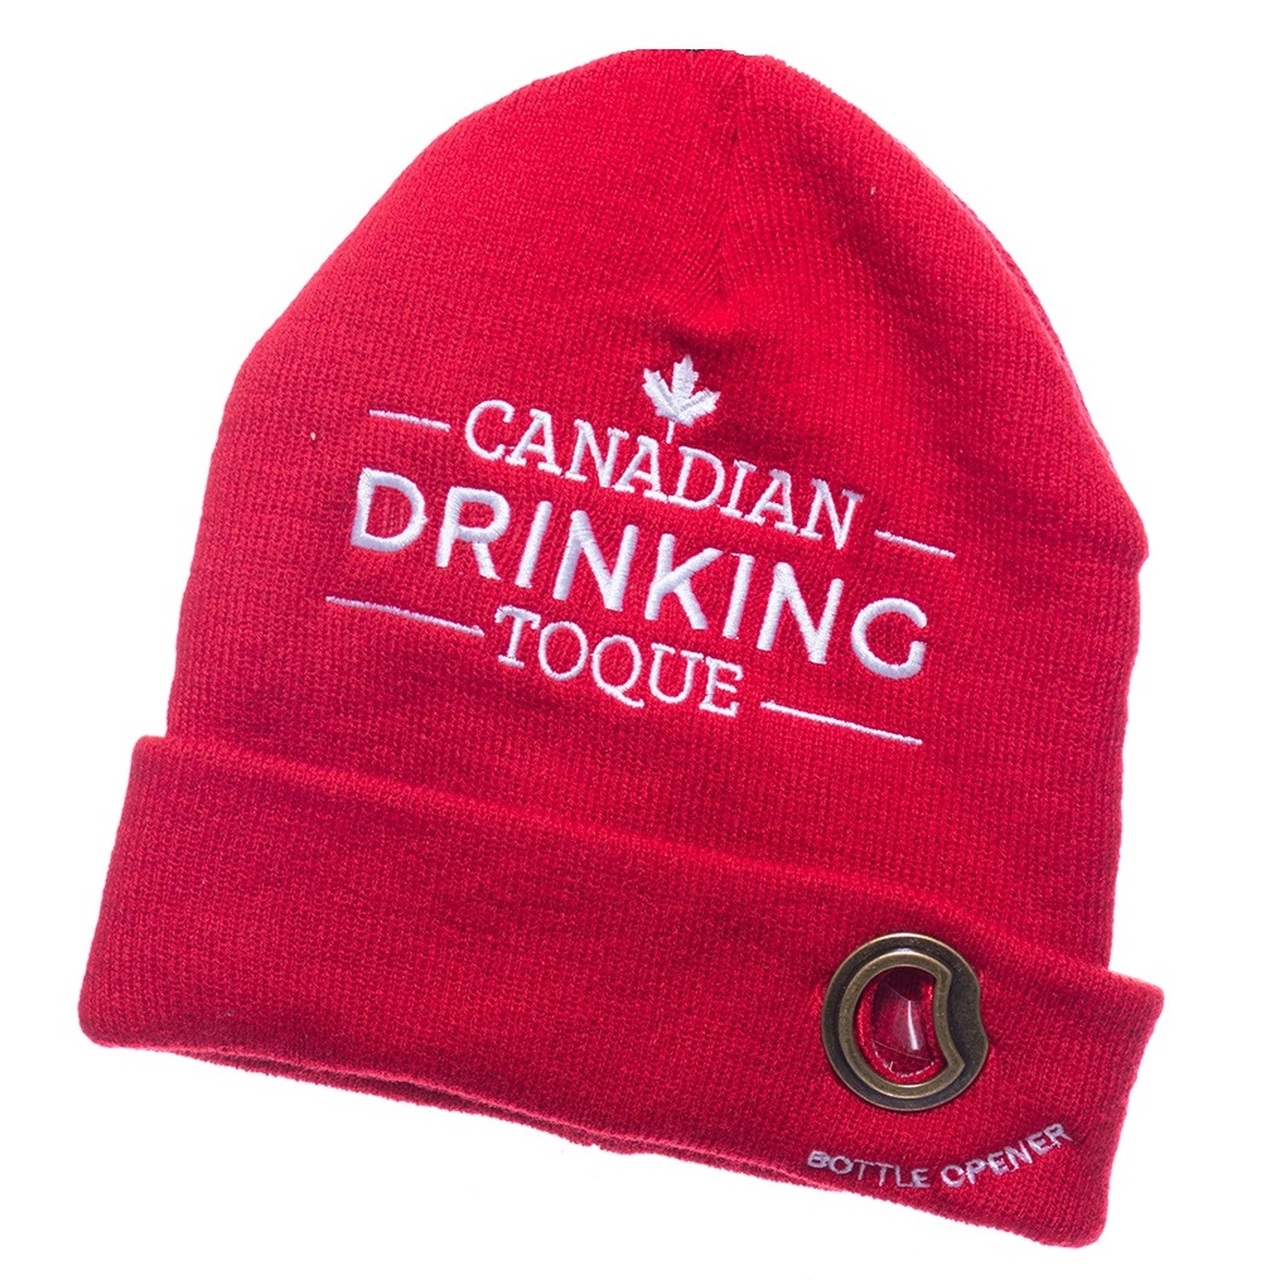 Canadian_Drinking_Toque_Red__35531.1476234386.jpg